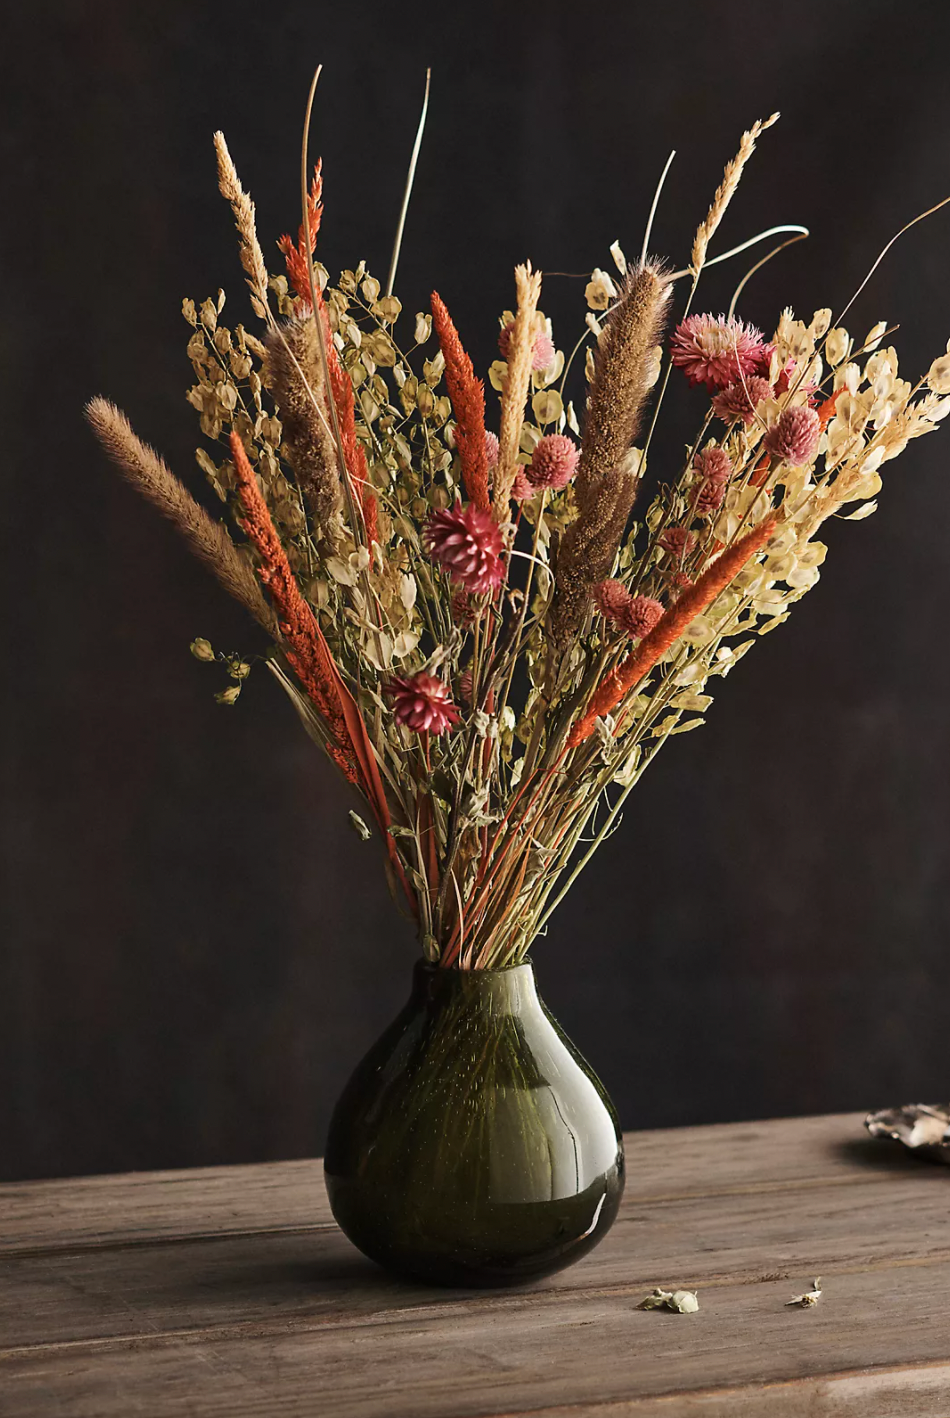 LIST: Where To Buy Pretty Dried Flowers Online